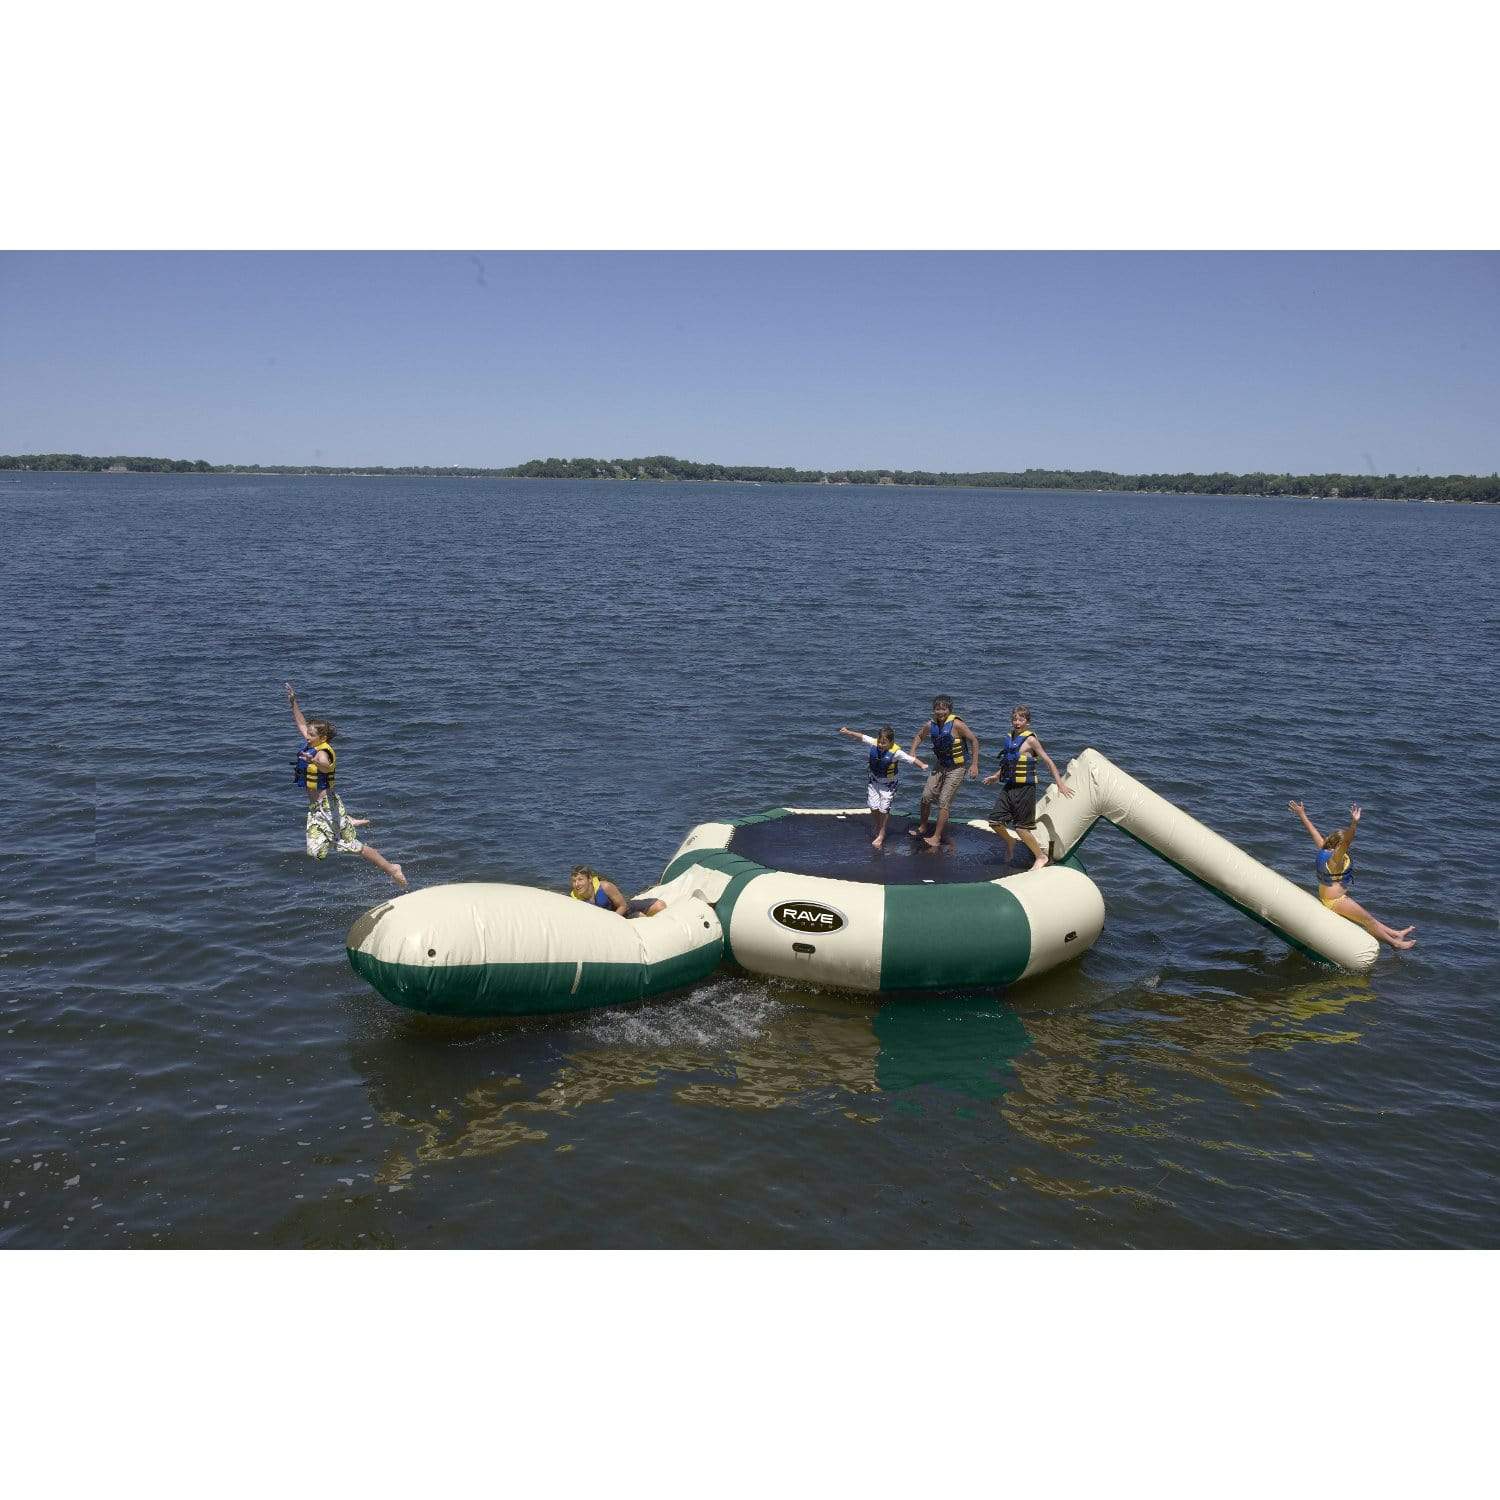 RAVE Water Bouncers - Reinforced Water Trampoline Bongo 15 w/Slide and Launch Northwoods